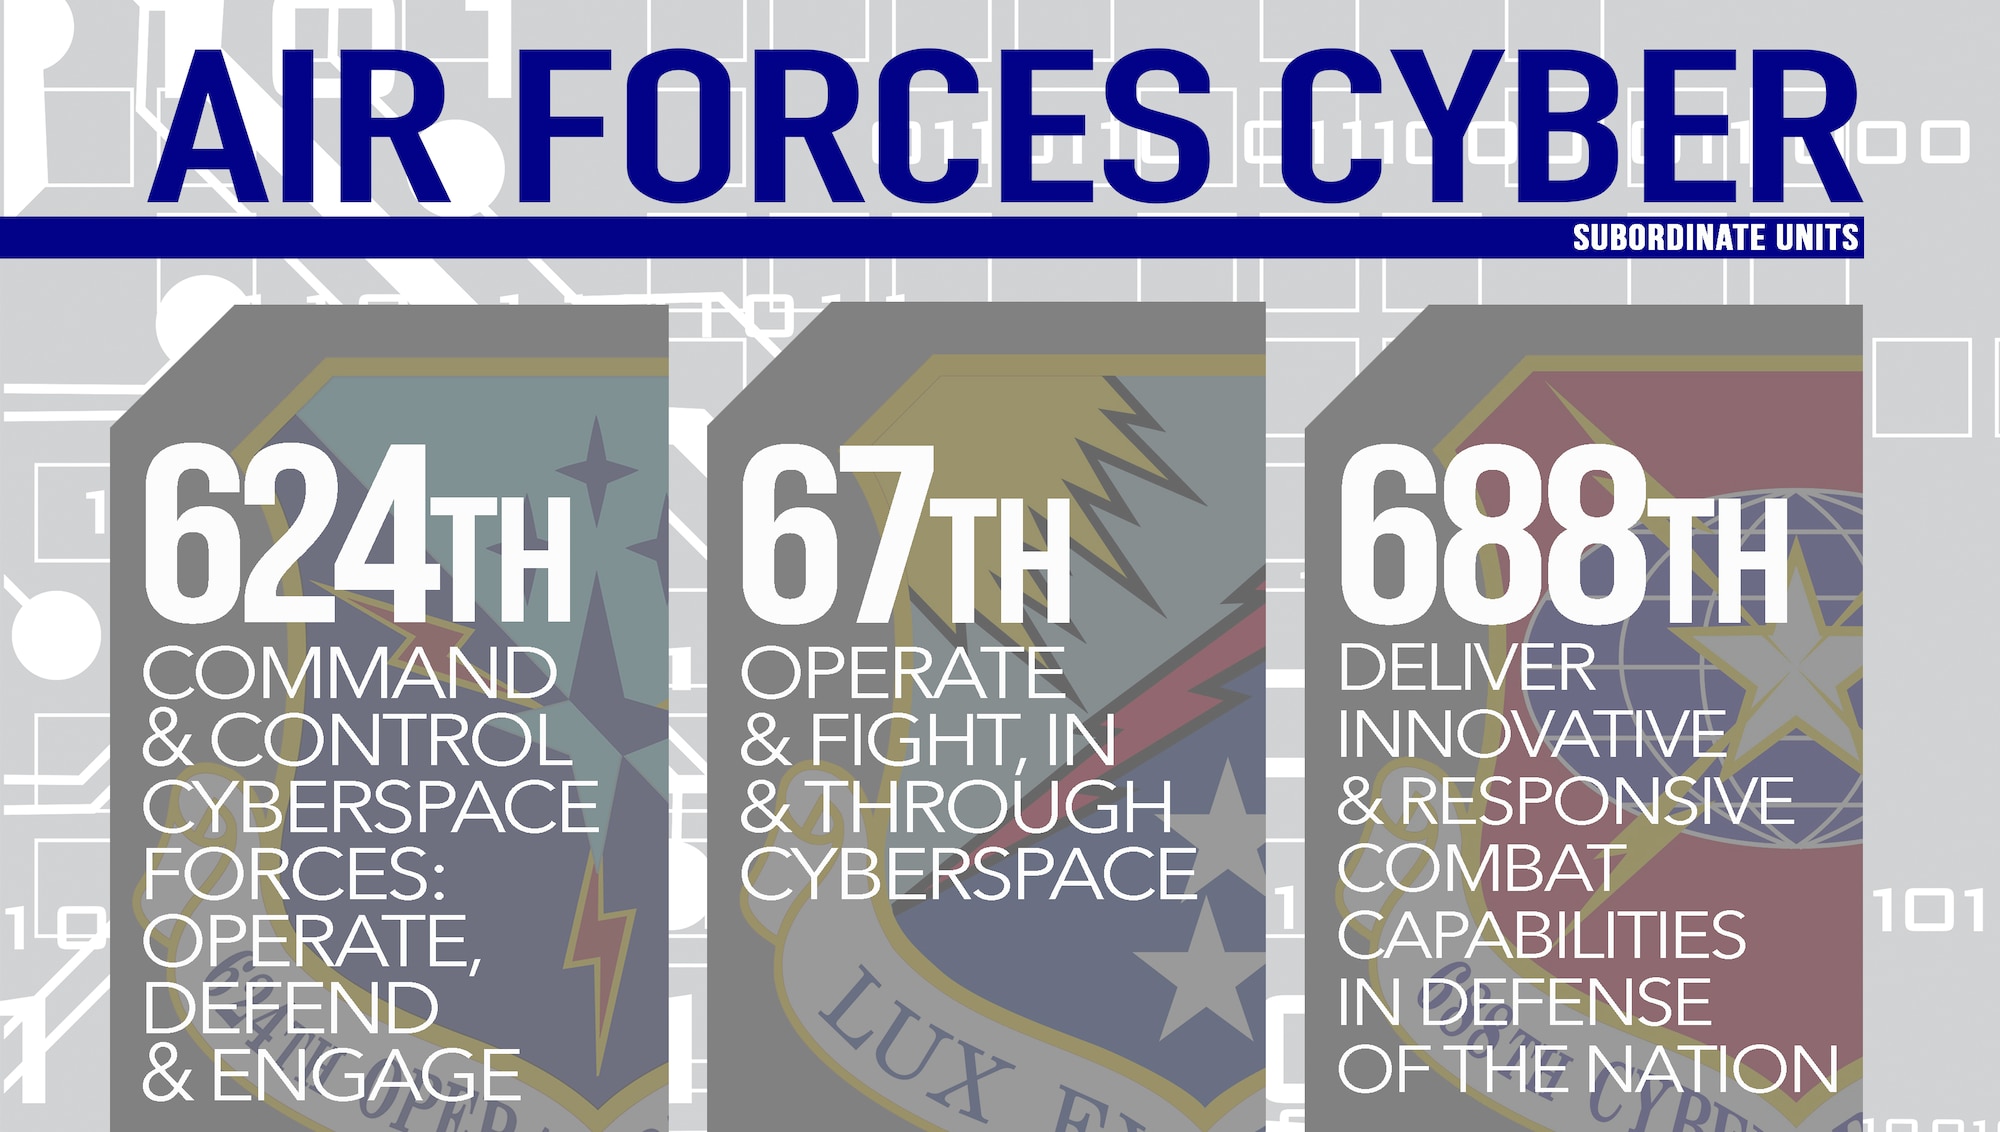 Air Forces Cyber's 624th Operations Center and 67th and 688th Cyberspace Wings fulfill their respective mission responsibilites to collectively enable AFCYBE's full-spectrum cyberspace operations in support of the the Air Force, joint force and nation. All three units are all headquartered at Joint Base San Antonio-Lackland, Texas. (U.S. Air Force graphic by Tech. Sgt. R.J. Biermann)